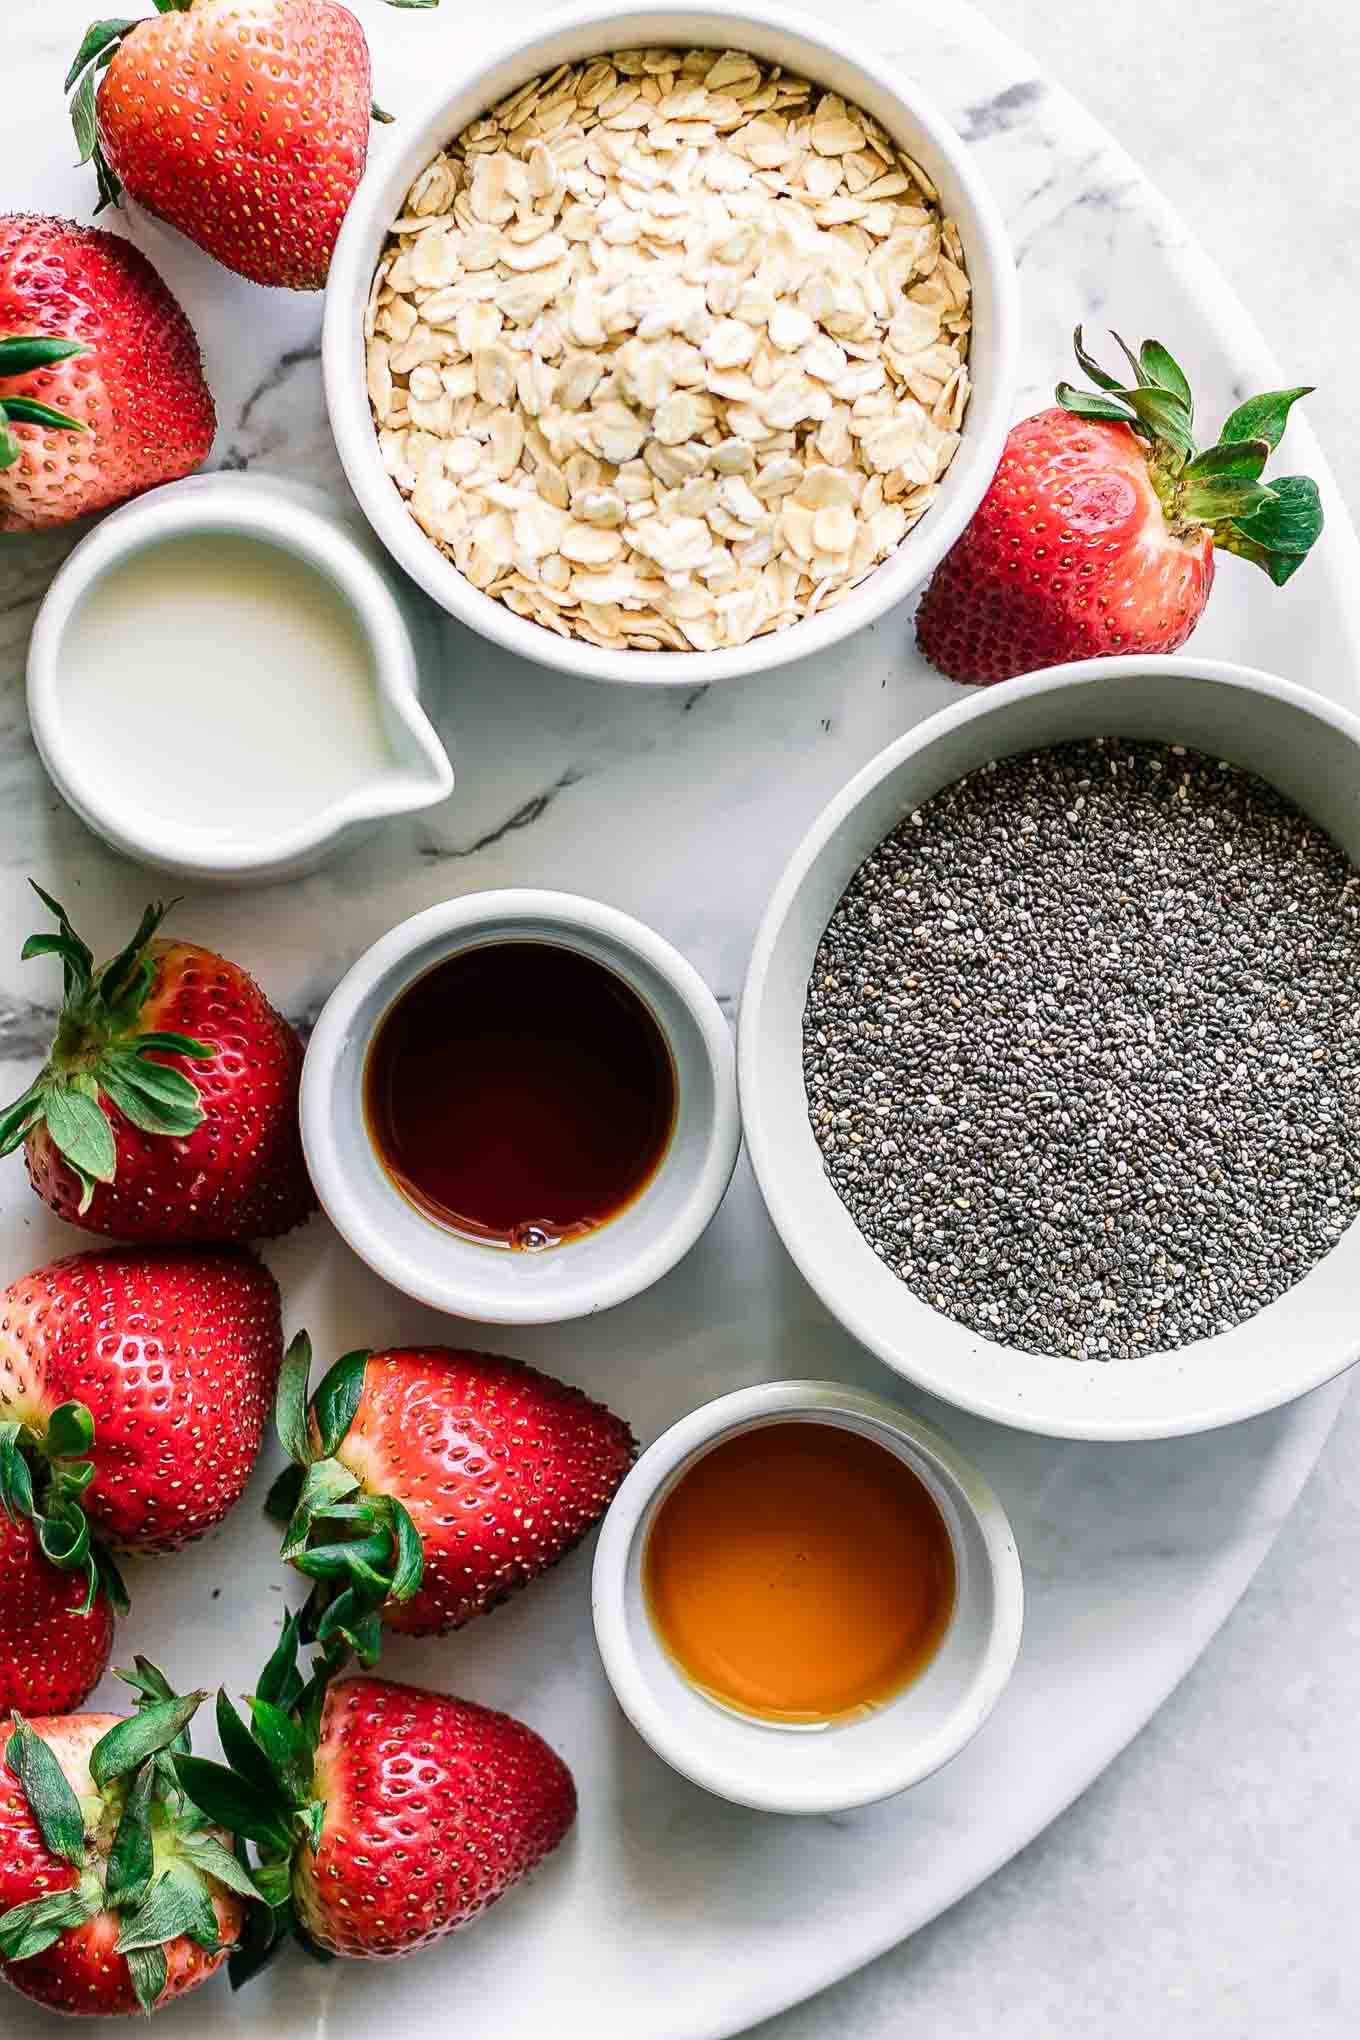 bowls of rolled oats, chia seeds, milk, maple syrup, vanilla, and strawberries on a white table for overnight oats